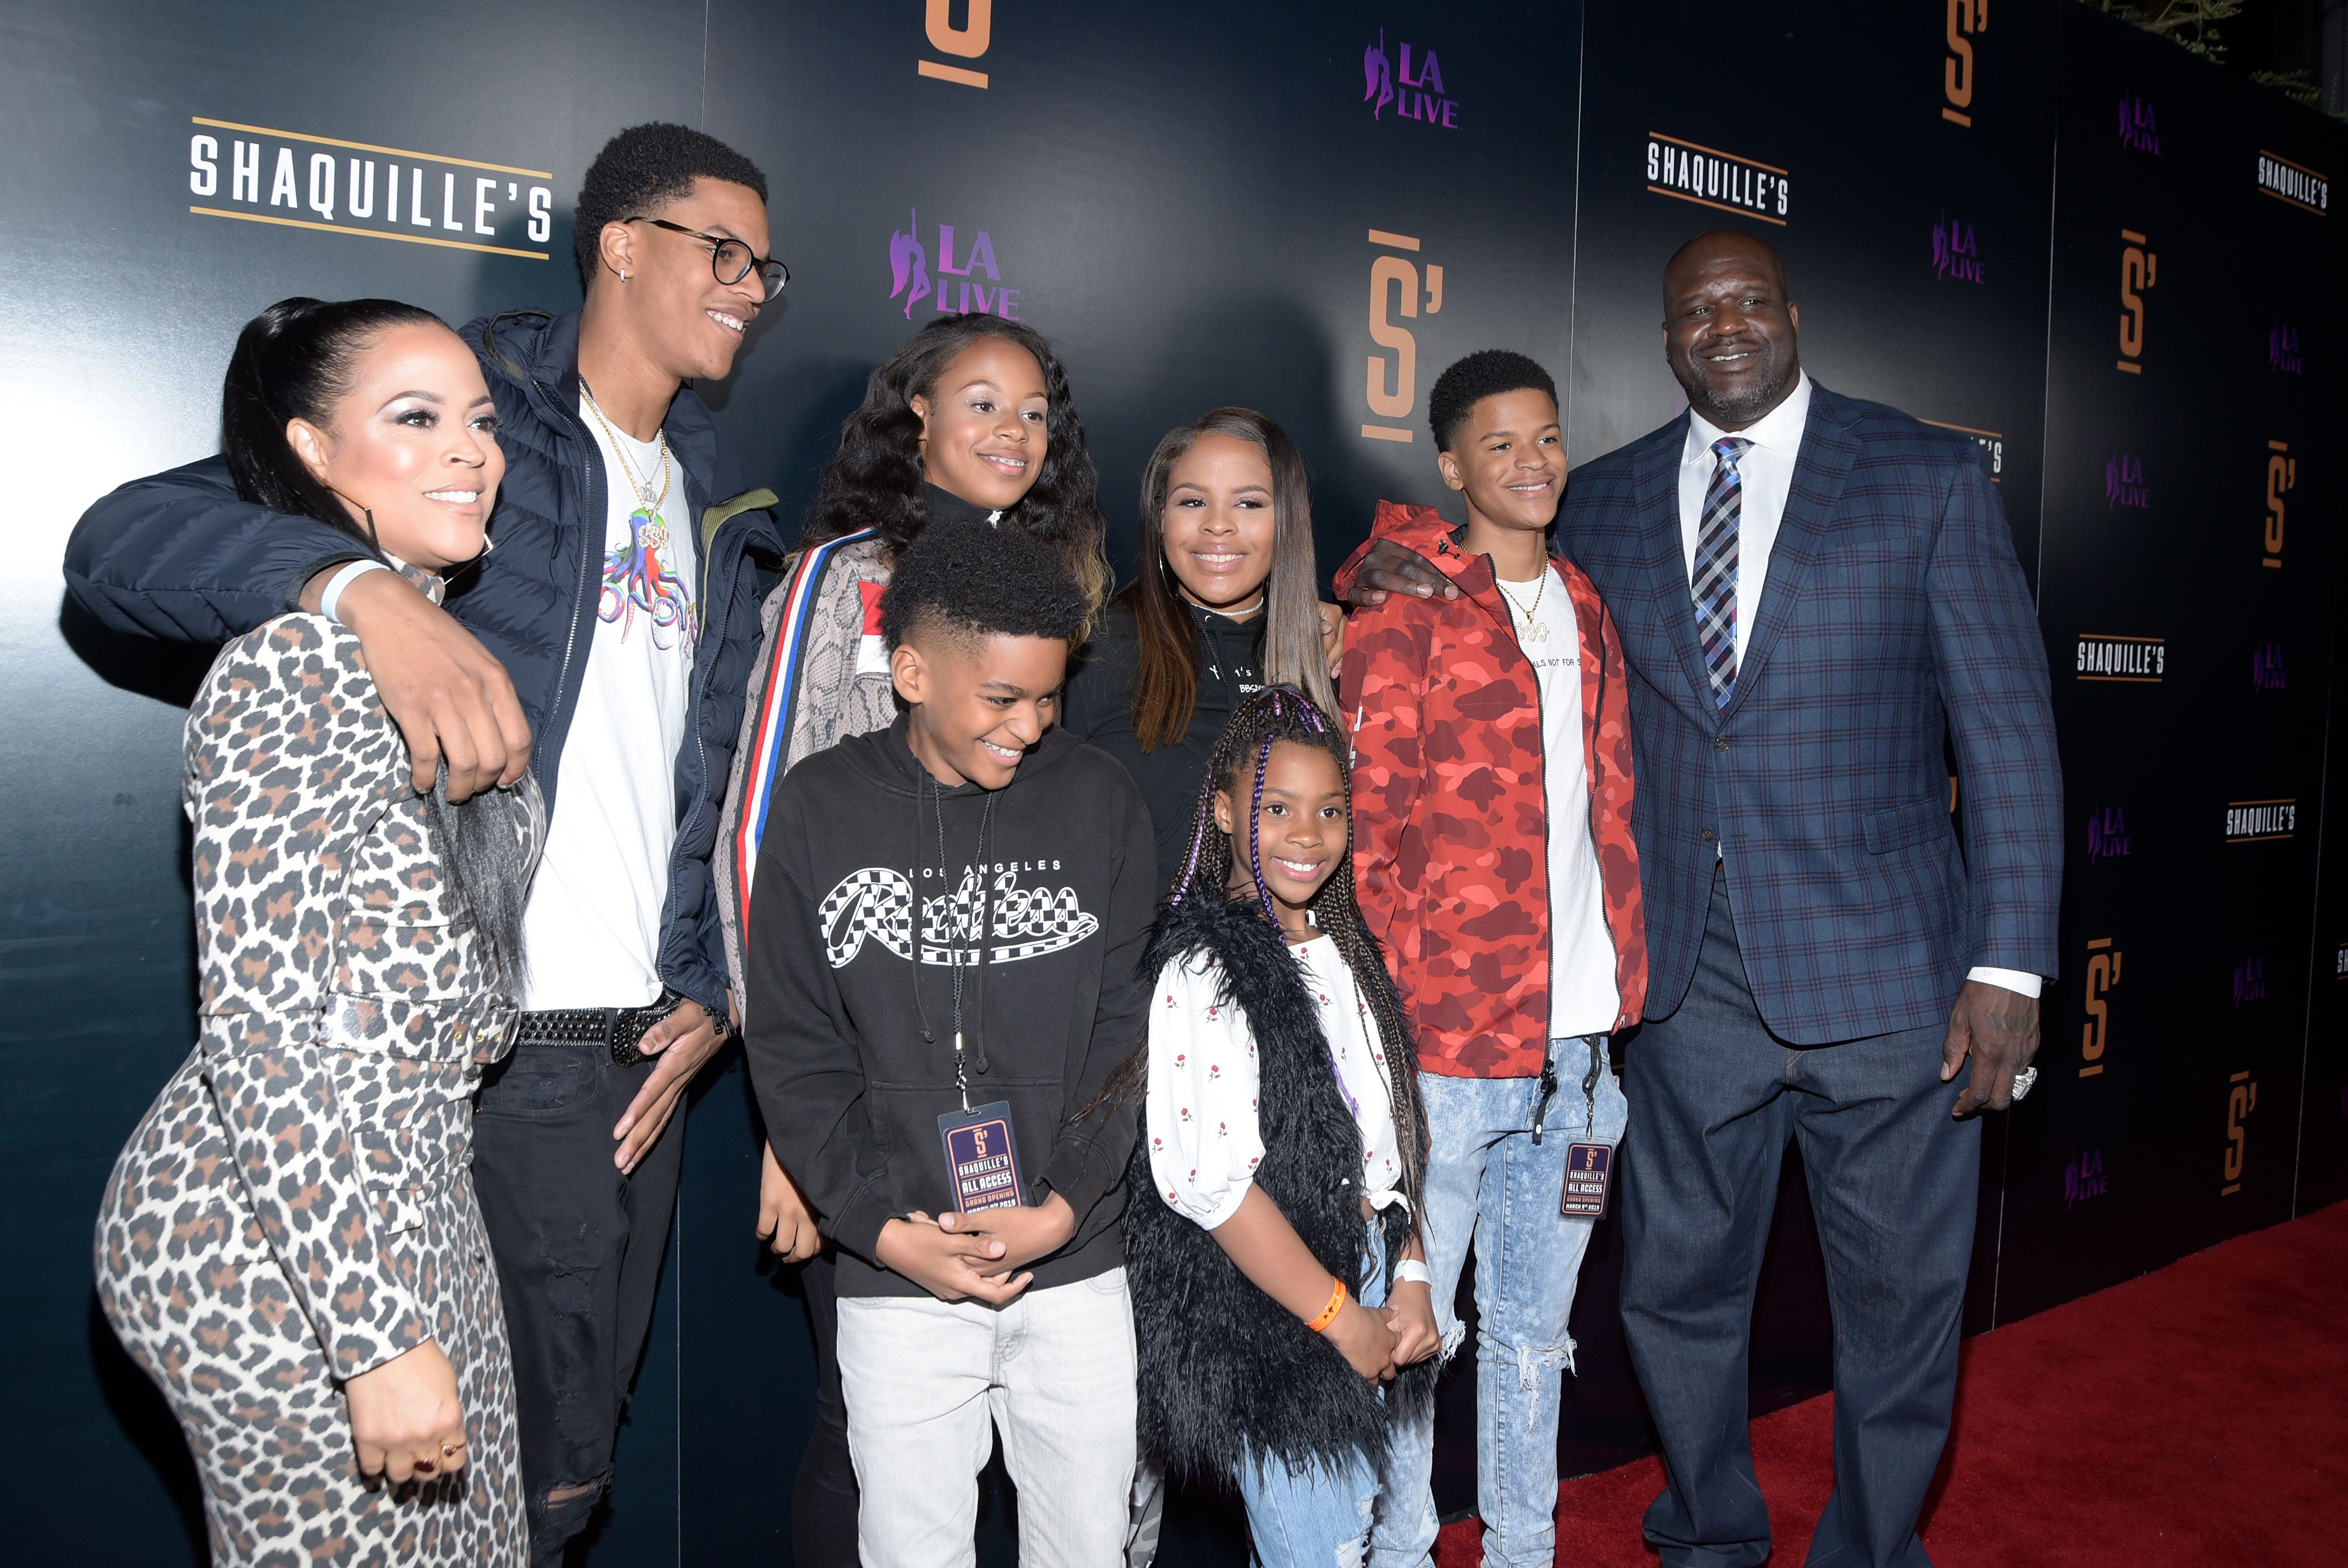 Shaunie, Shaquille O'Neal (R) and family at the opening of Shaquille's At L.A. on March 09, 2019 in Los Angeles. | Photo: Getty Images